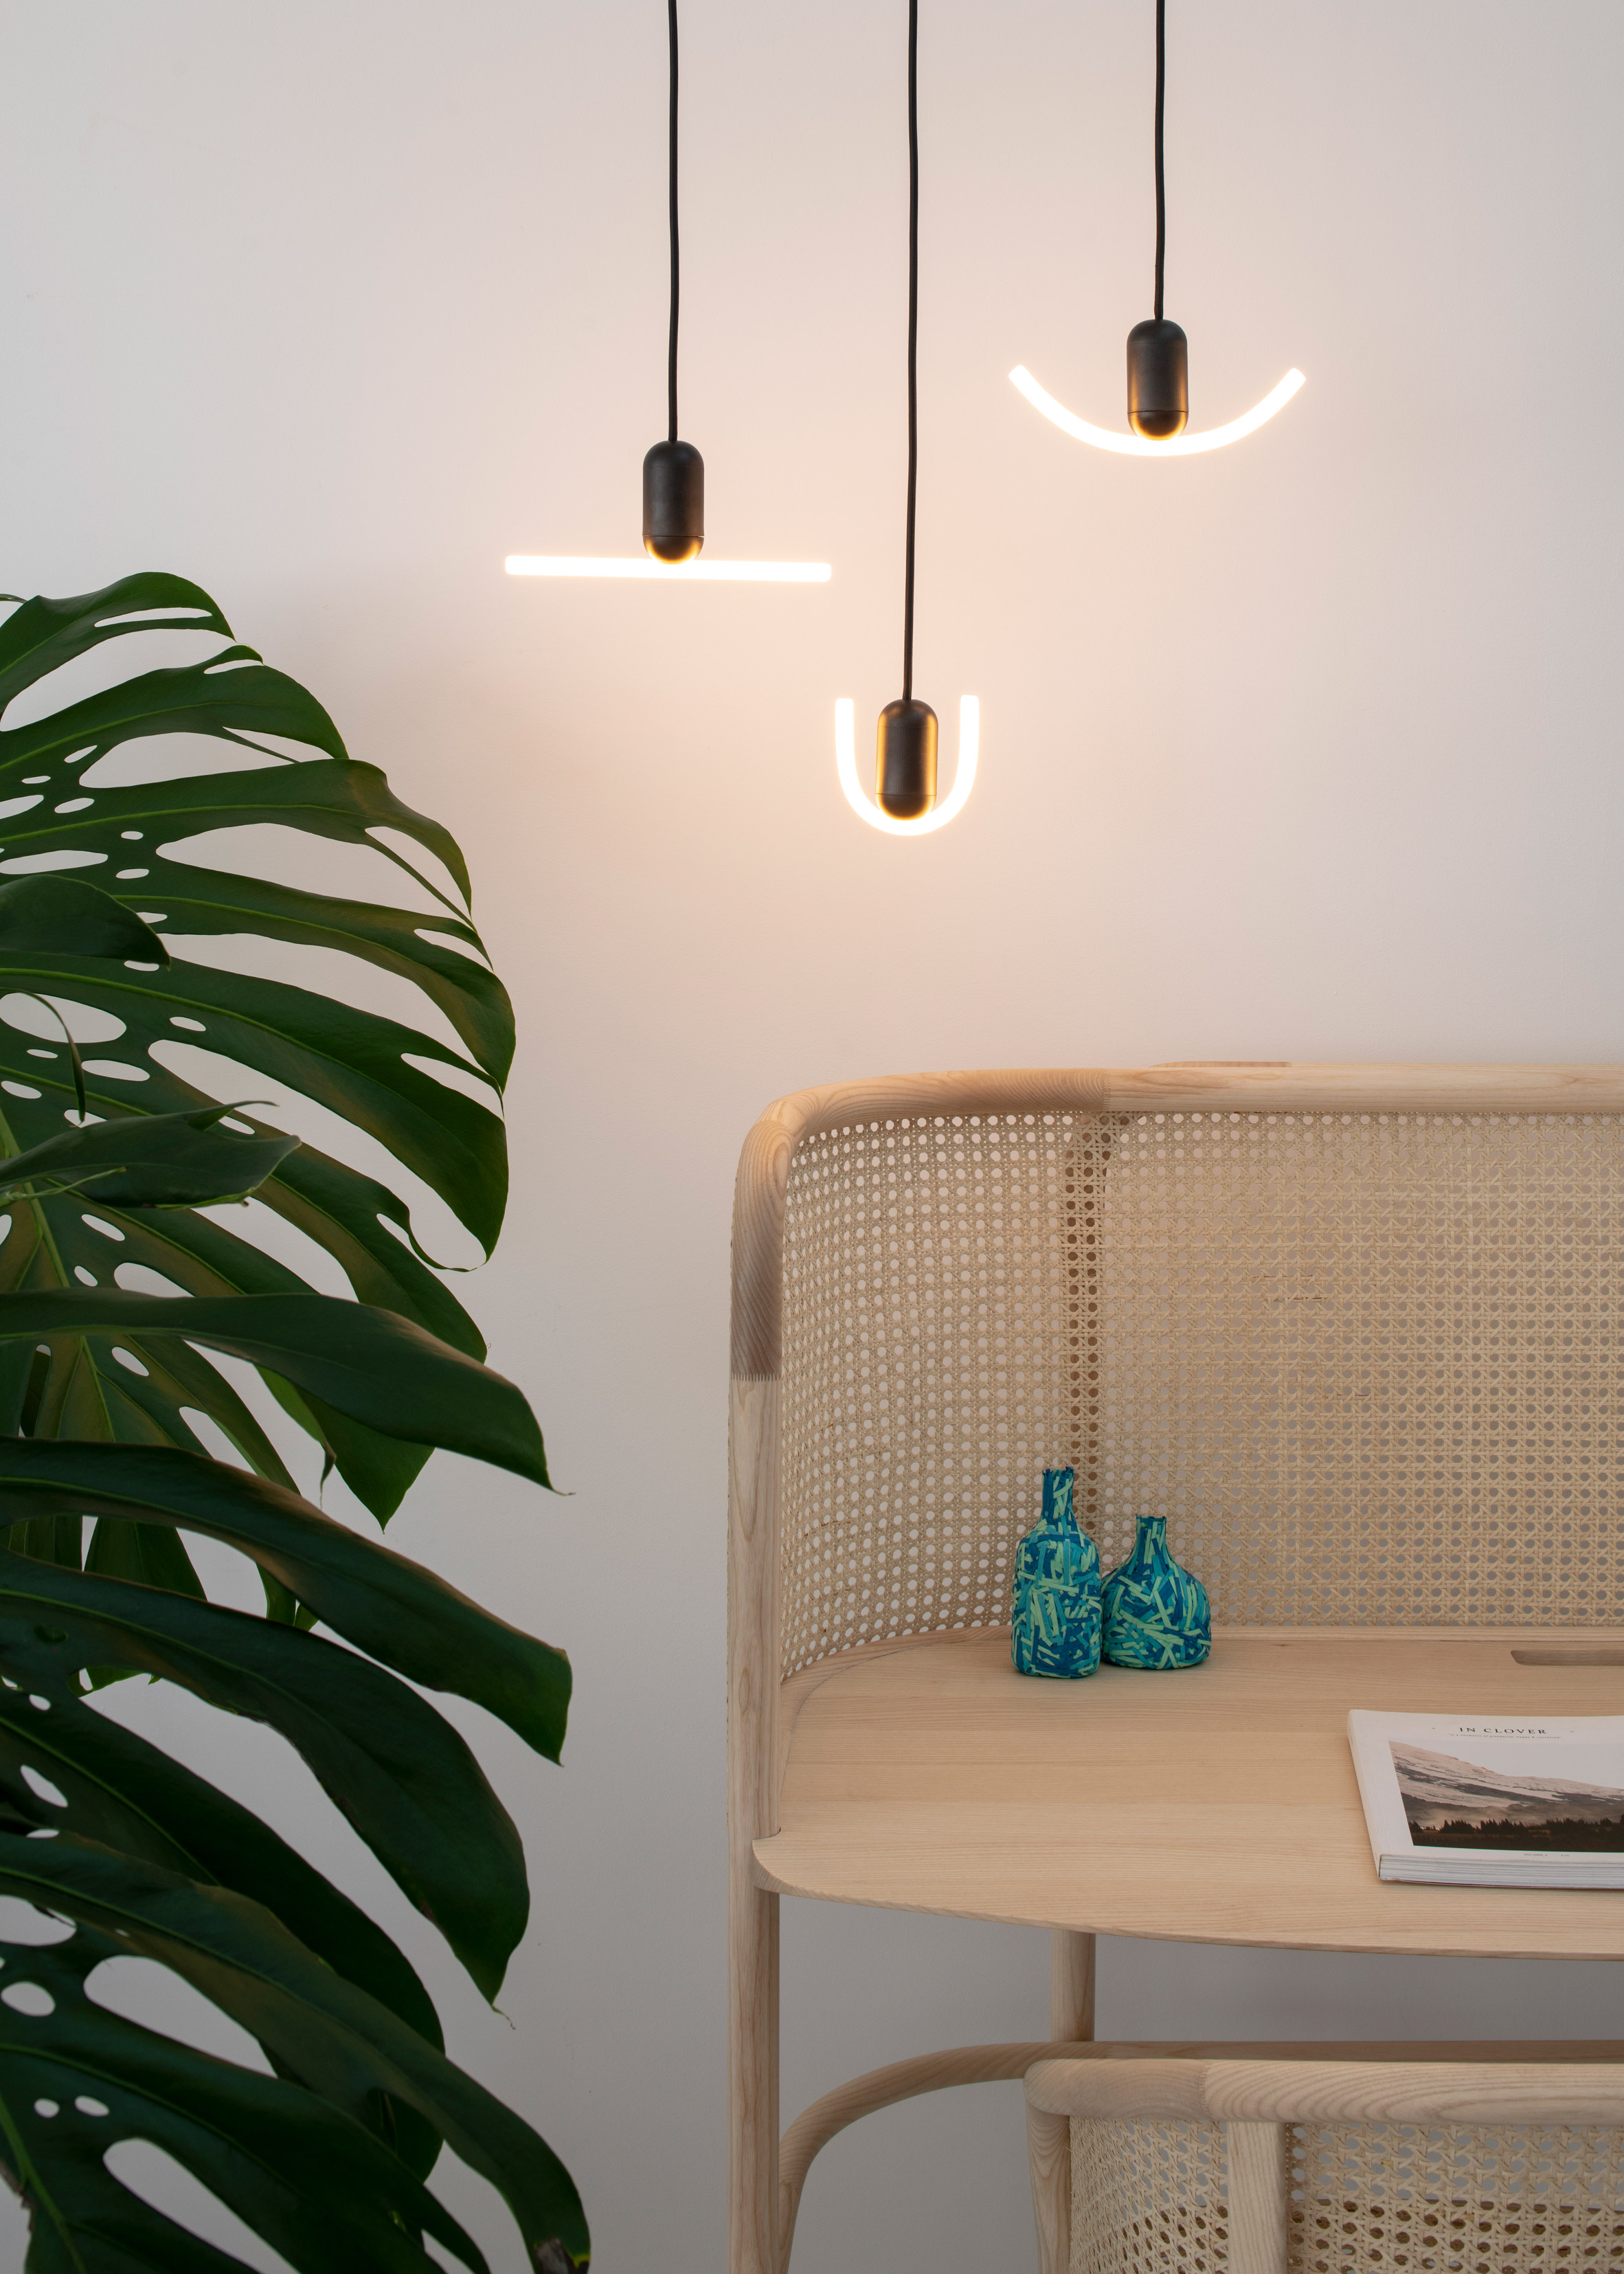 Samuel Wilkinson launches first collection of LED Beem lights